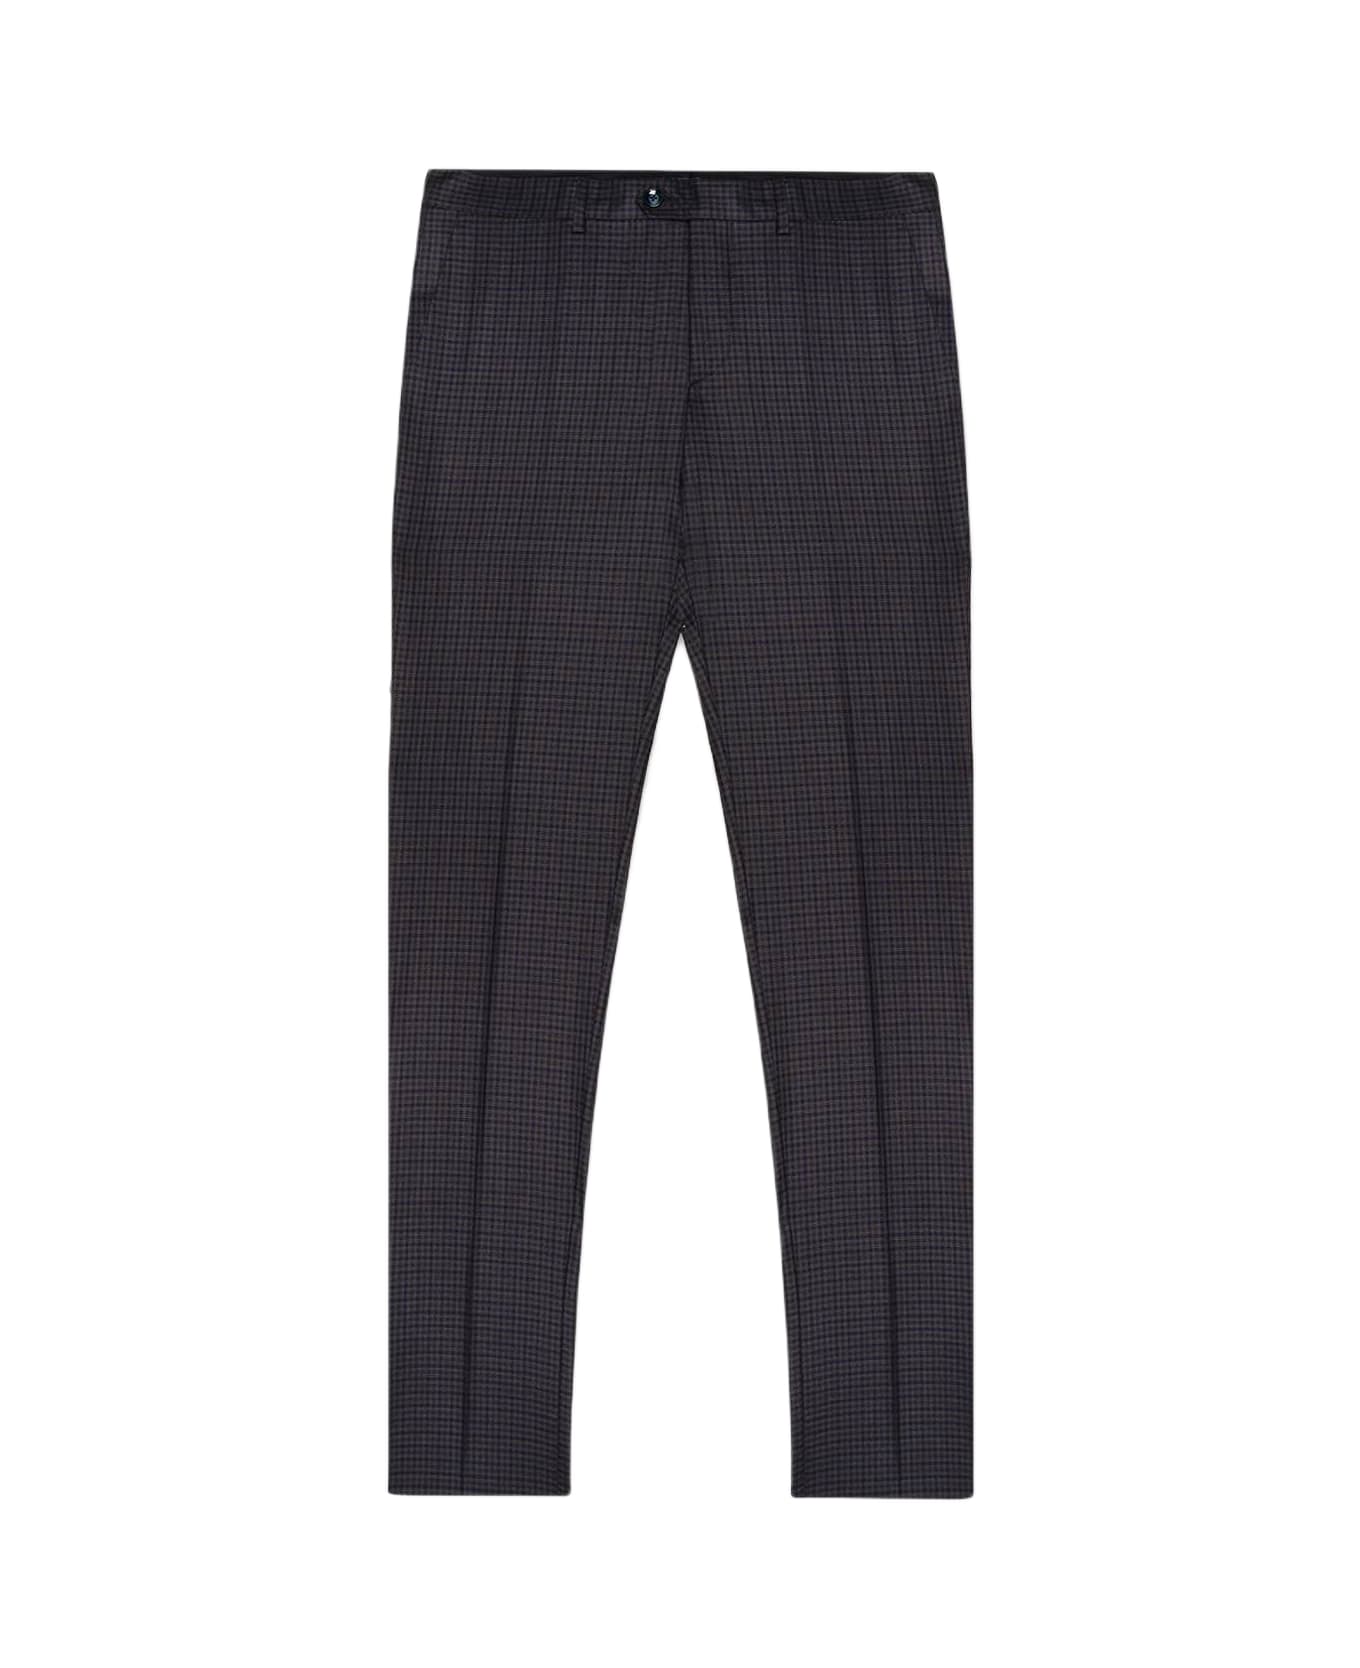 Larusmiani Trousers 'checked' Pants - Navy